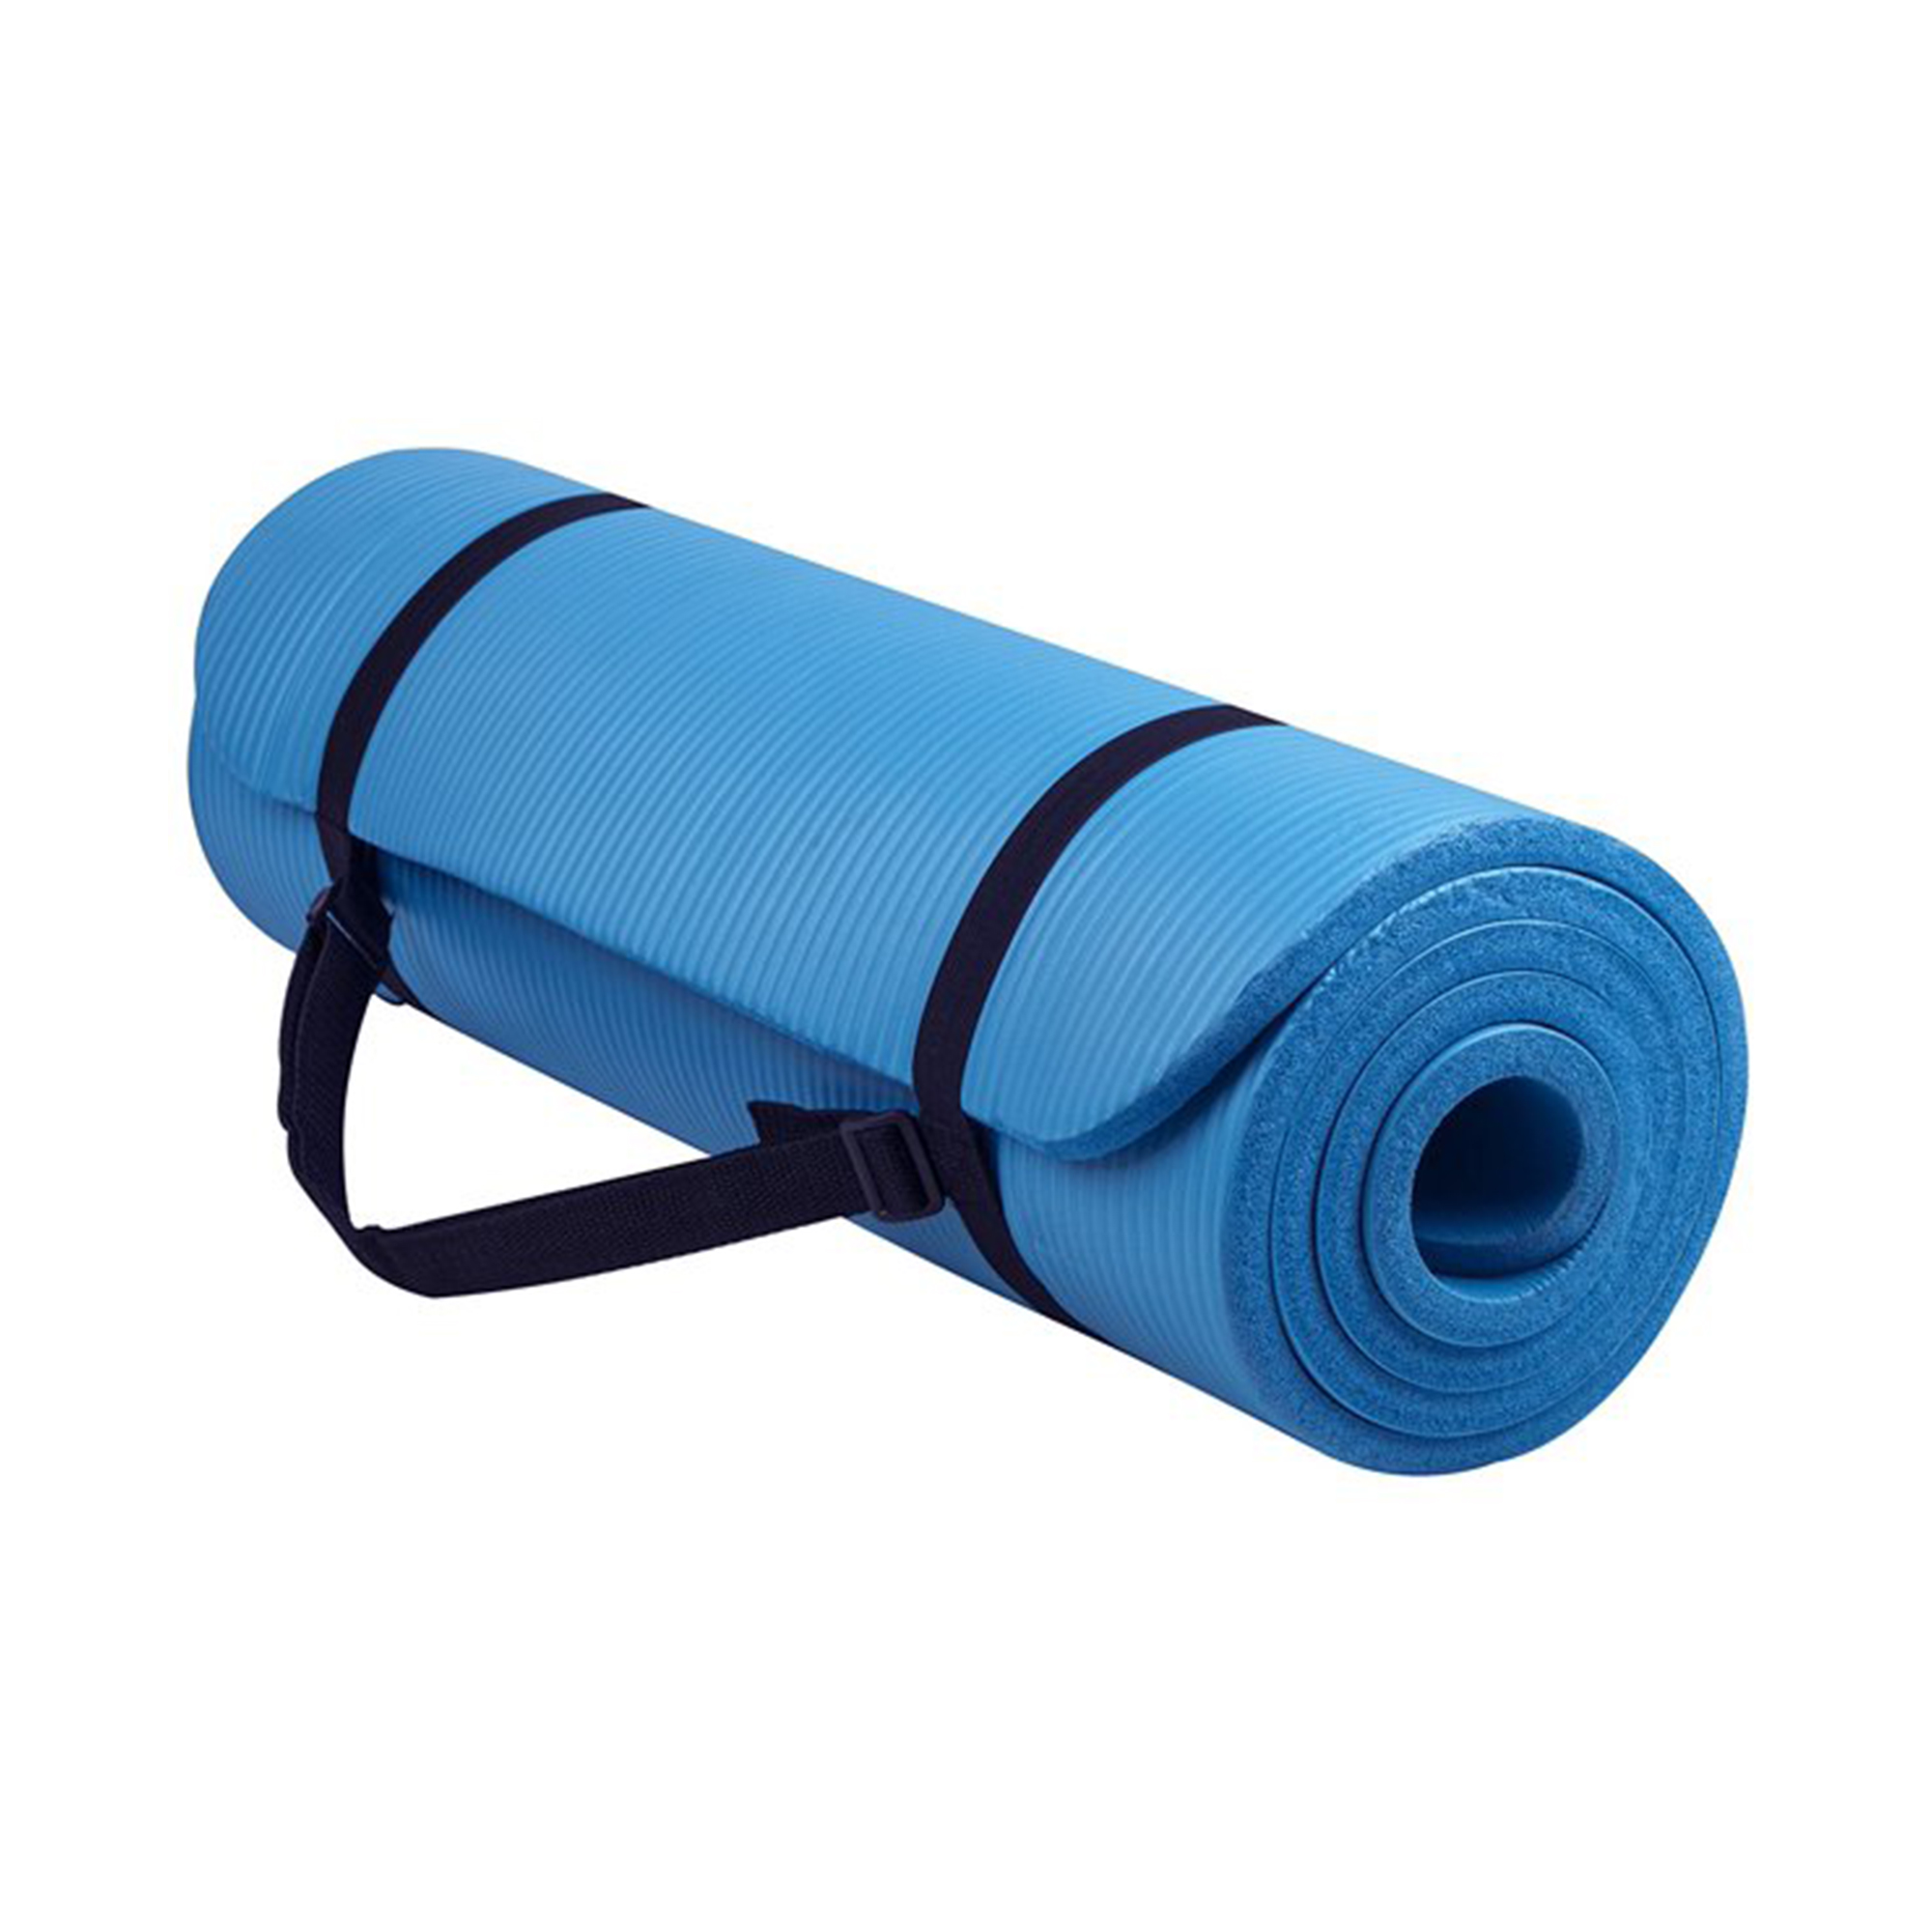 Everyday Essentials All-Purpose 1/2-Inch High Density Foam Exercise Yoga Mat Anti-Tear with Carrying Strap, Blue - image 1 of 4